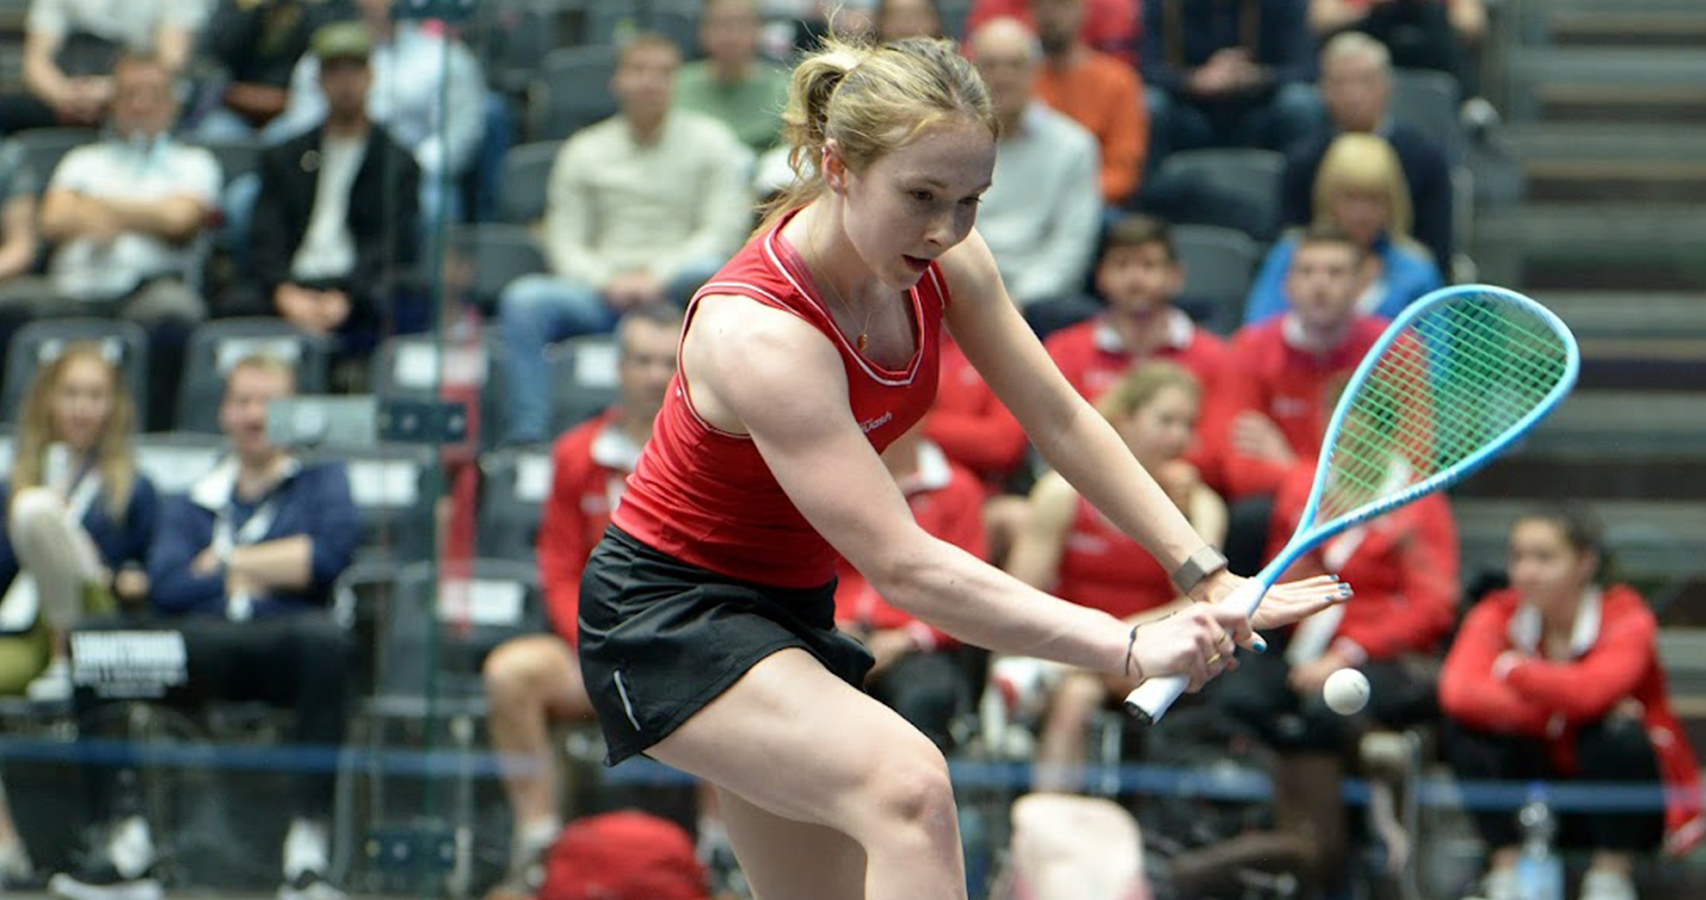 Lucy Turmel on court playing squash